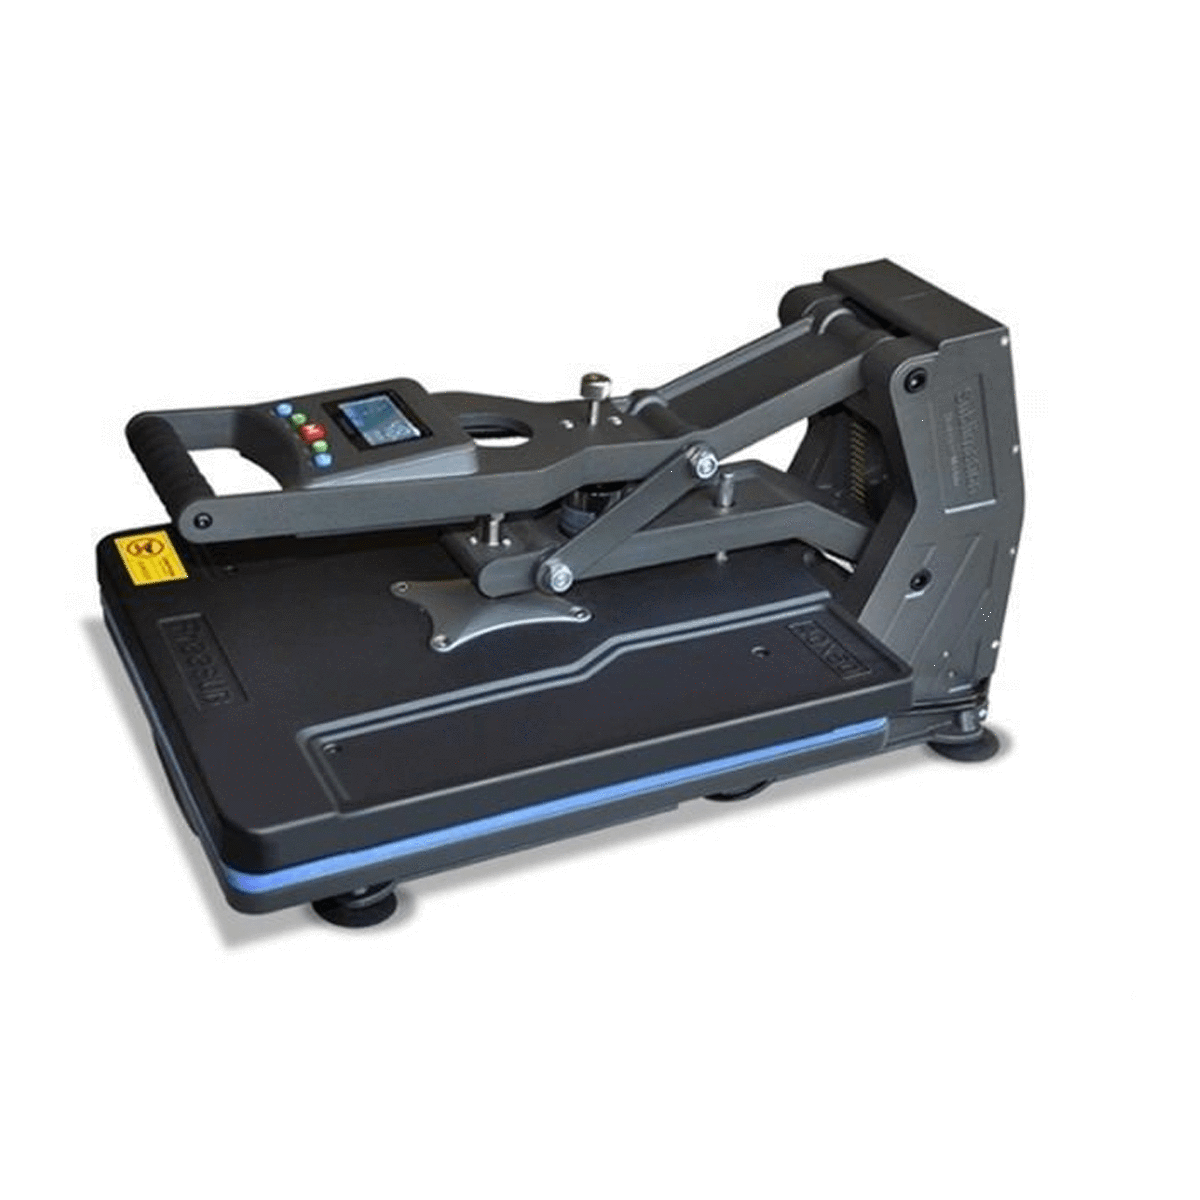 Heat Press Machine For Printing Picture on a flat surface